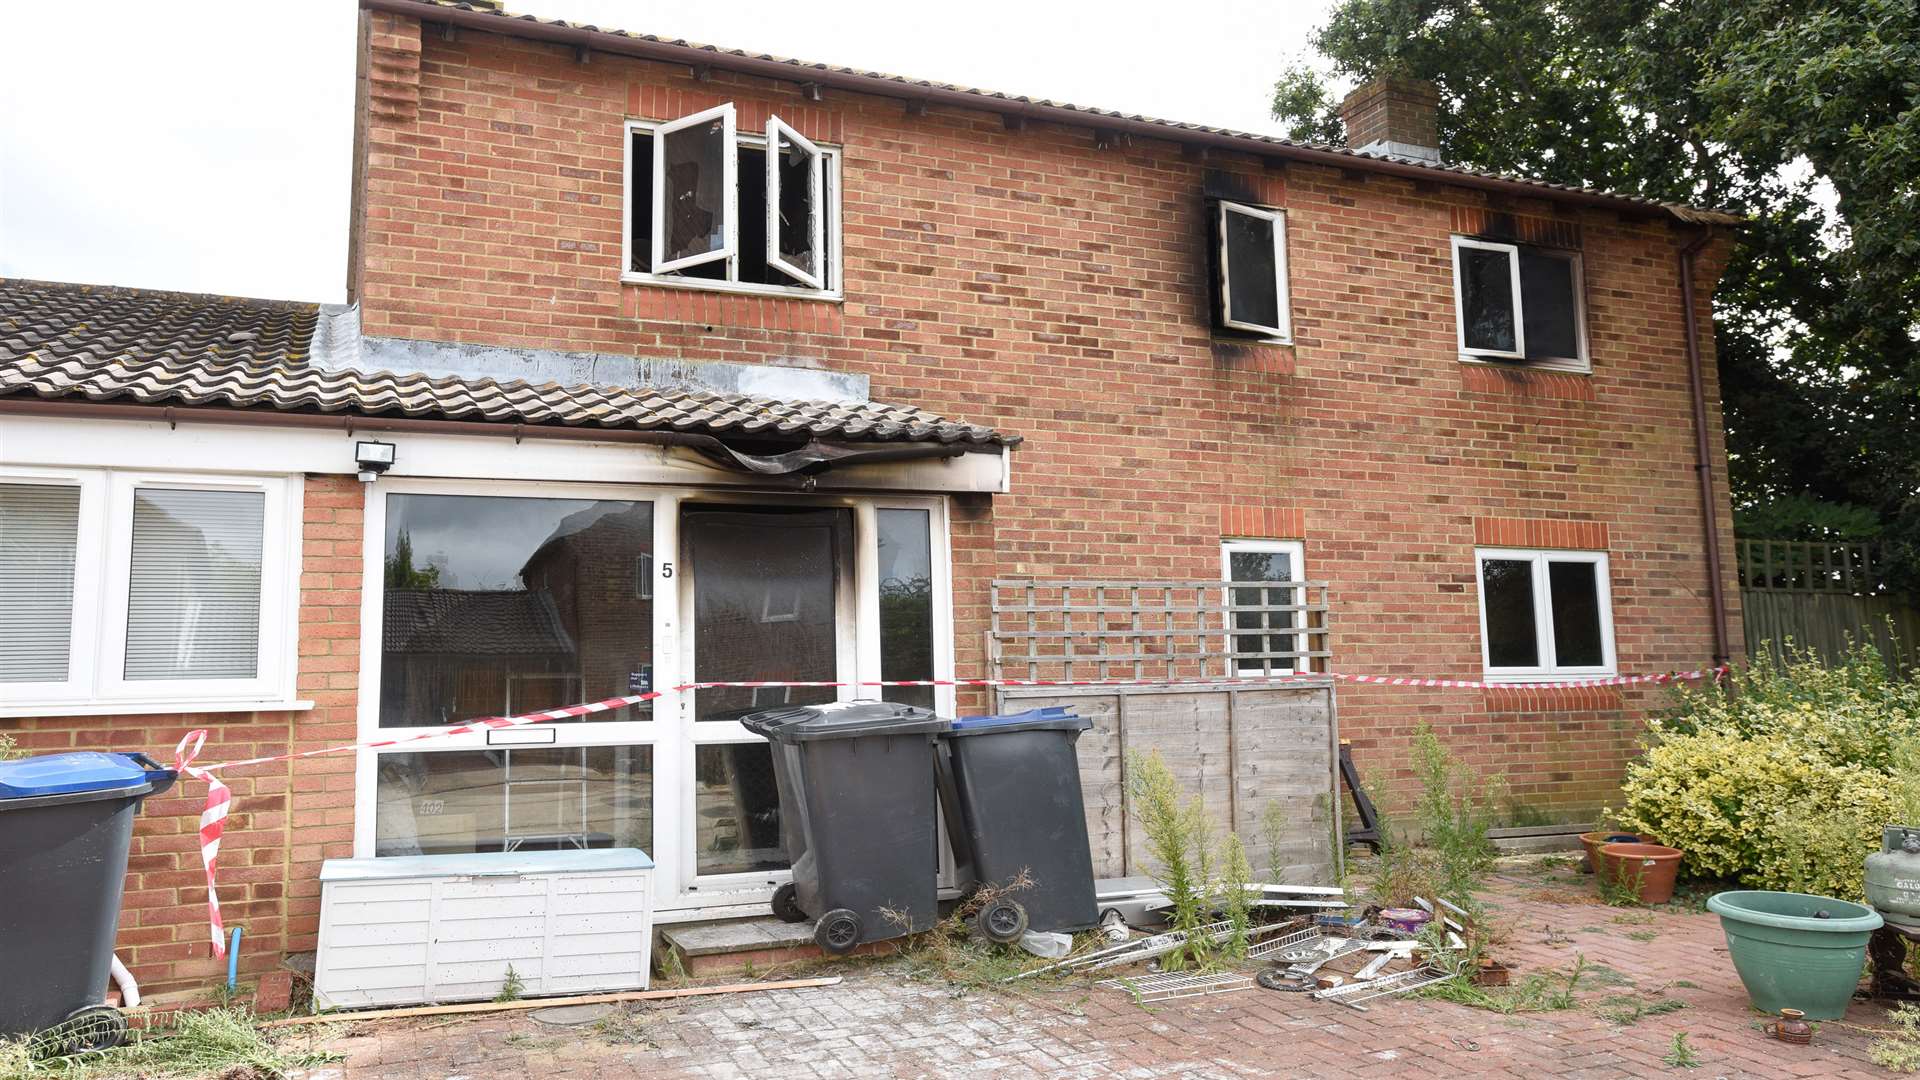 The house was left severely damaged after a fire